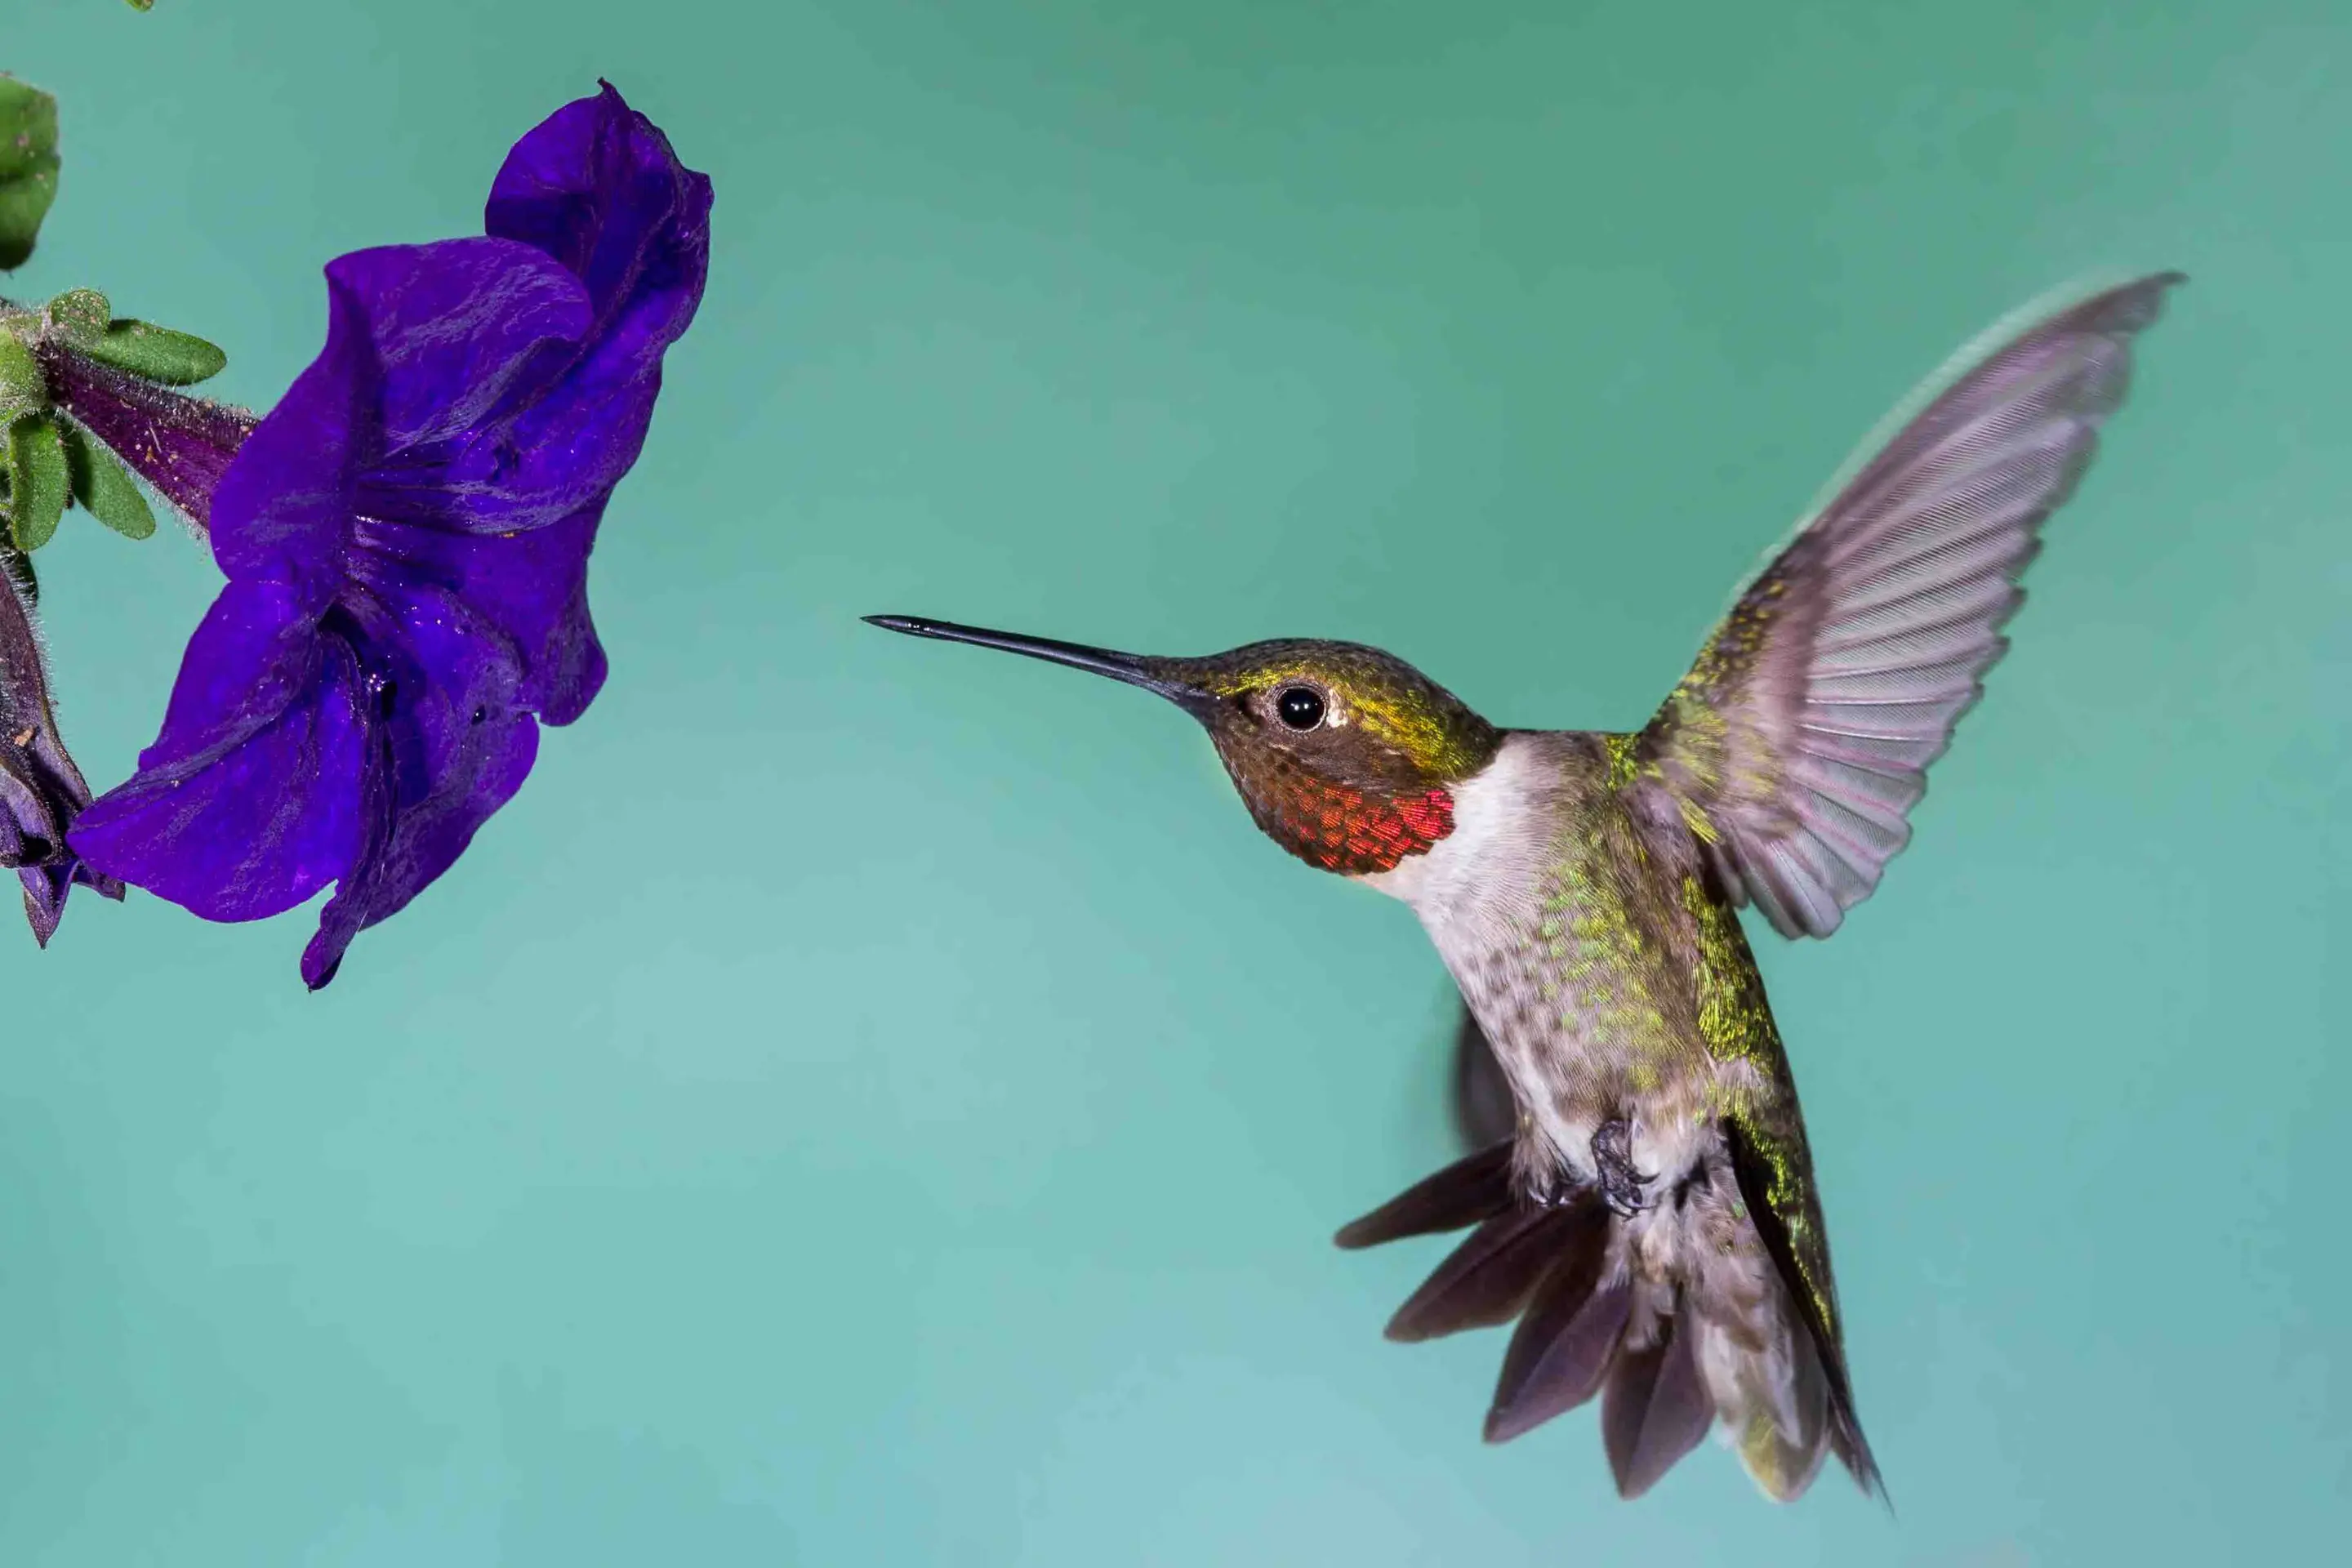 A side view image of a hummingbird hovering in front of a purple flower